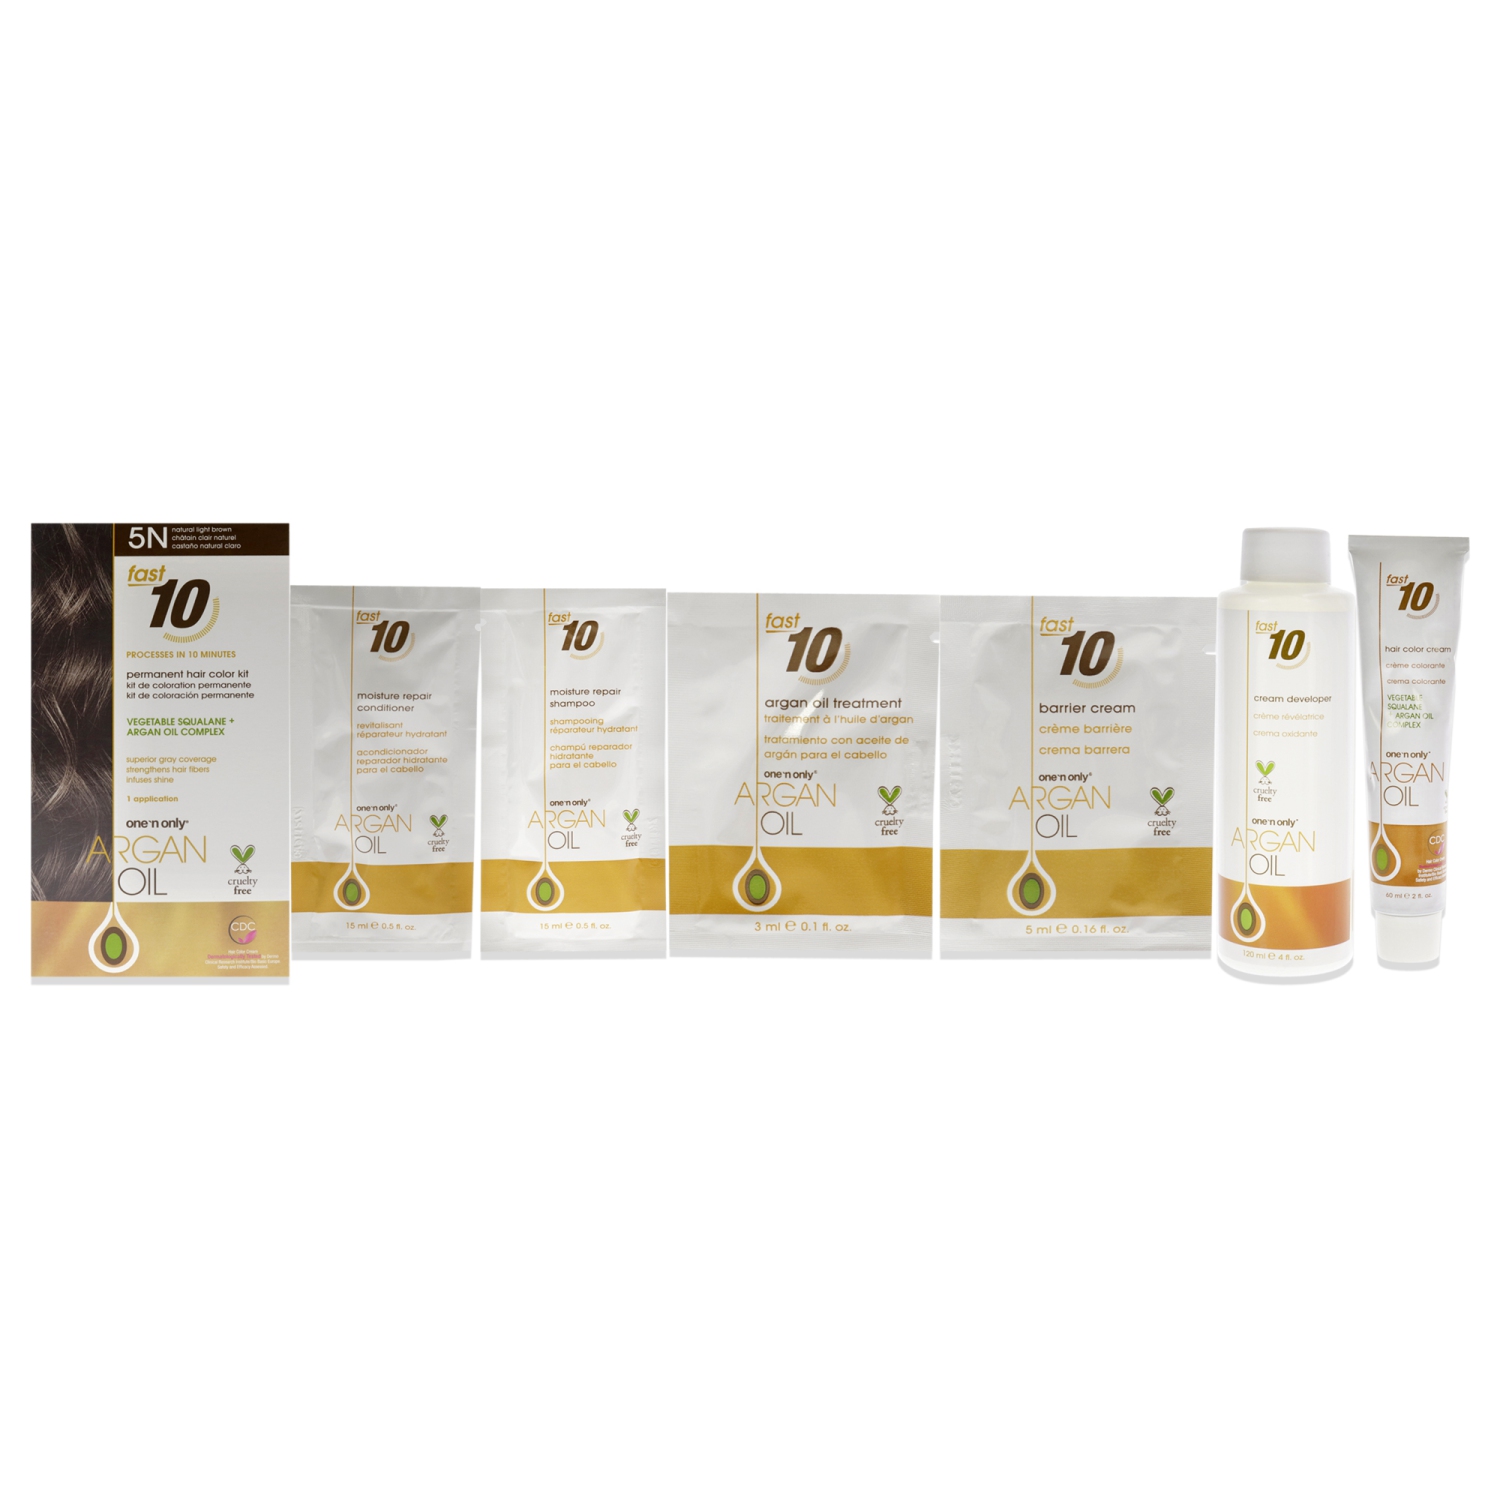 Argan Oil Fast 10 Permanent Hair Color Kit - 5N Natural Light Brown by One n Only for Unisex - 1 Pc Hair Color